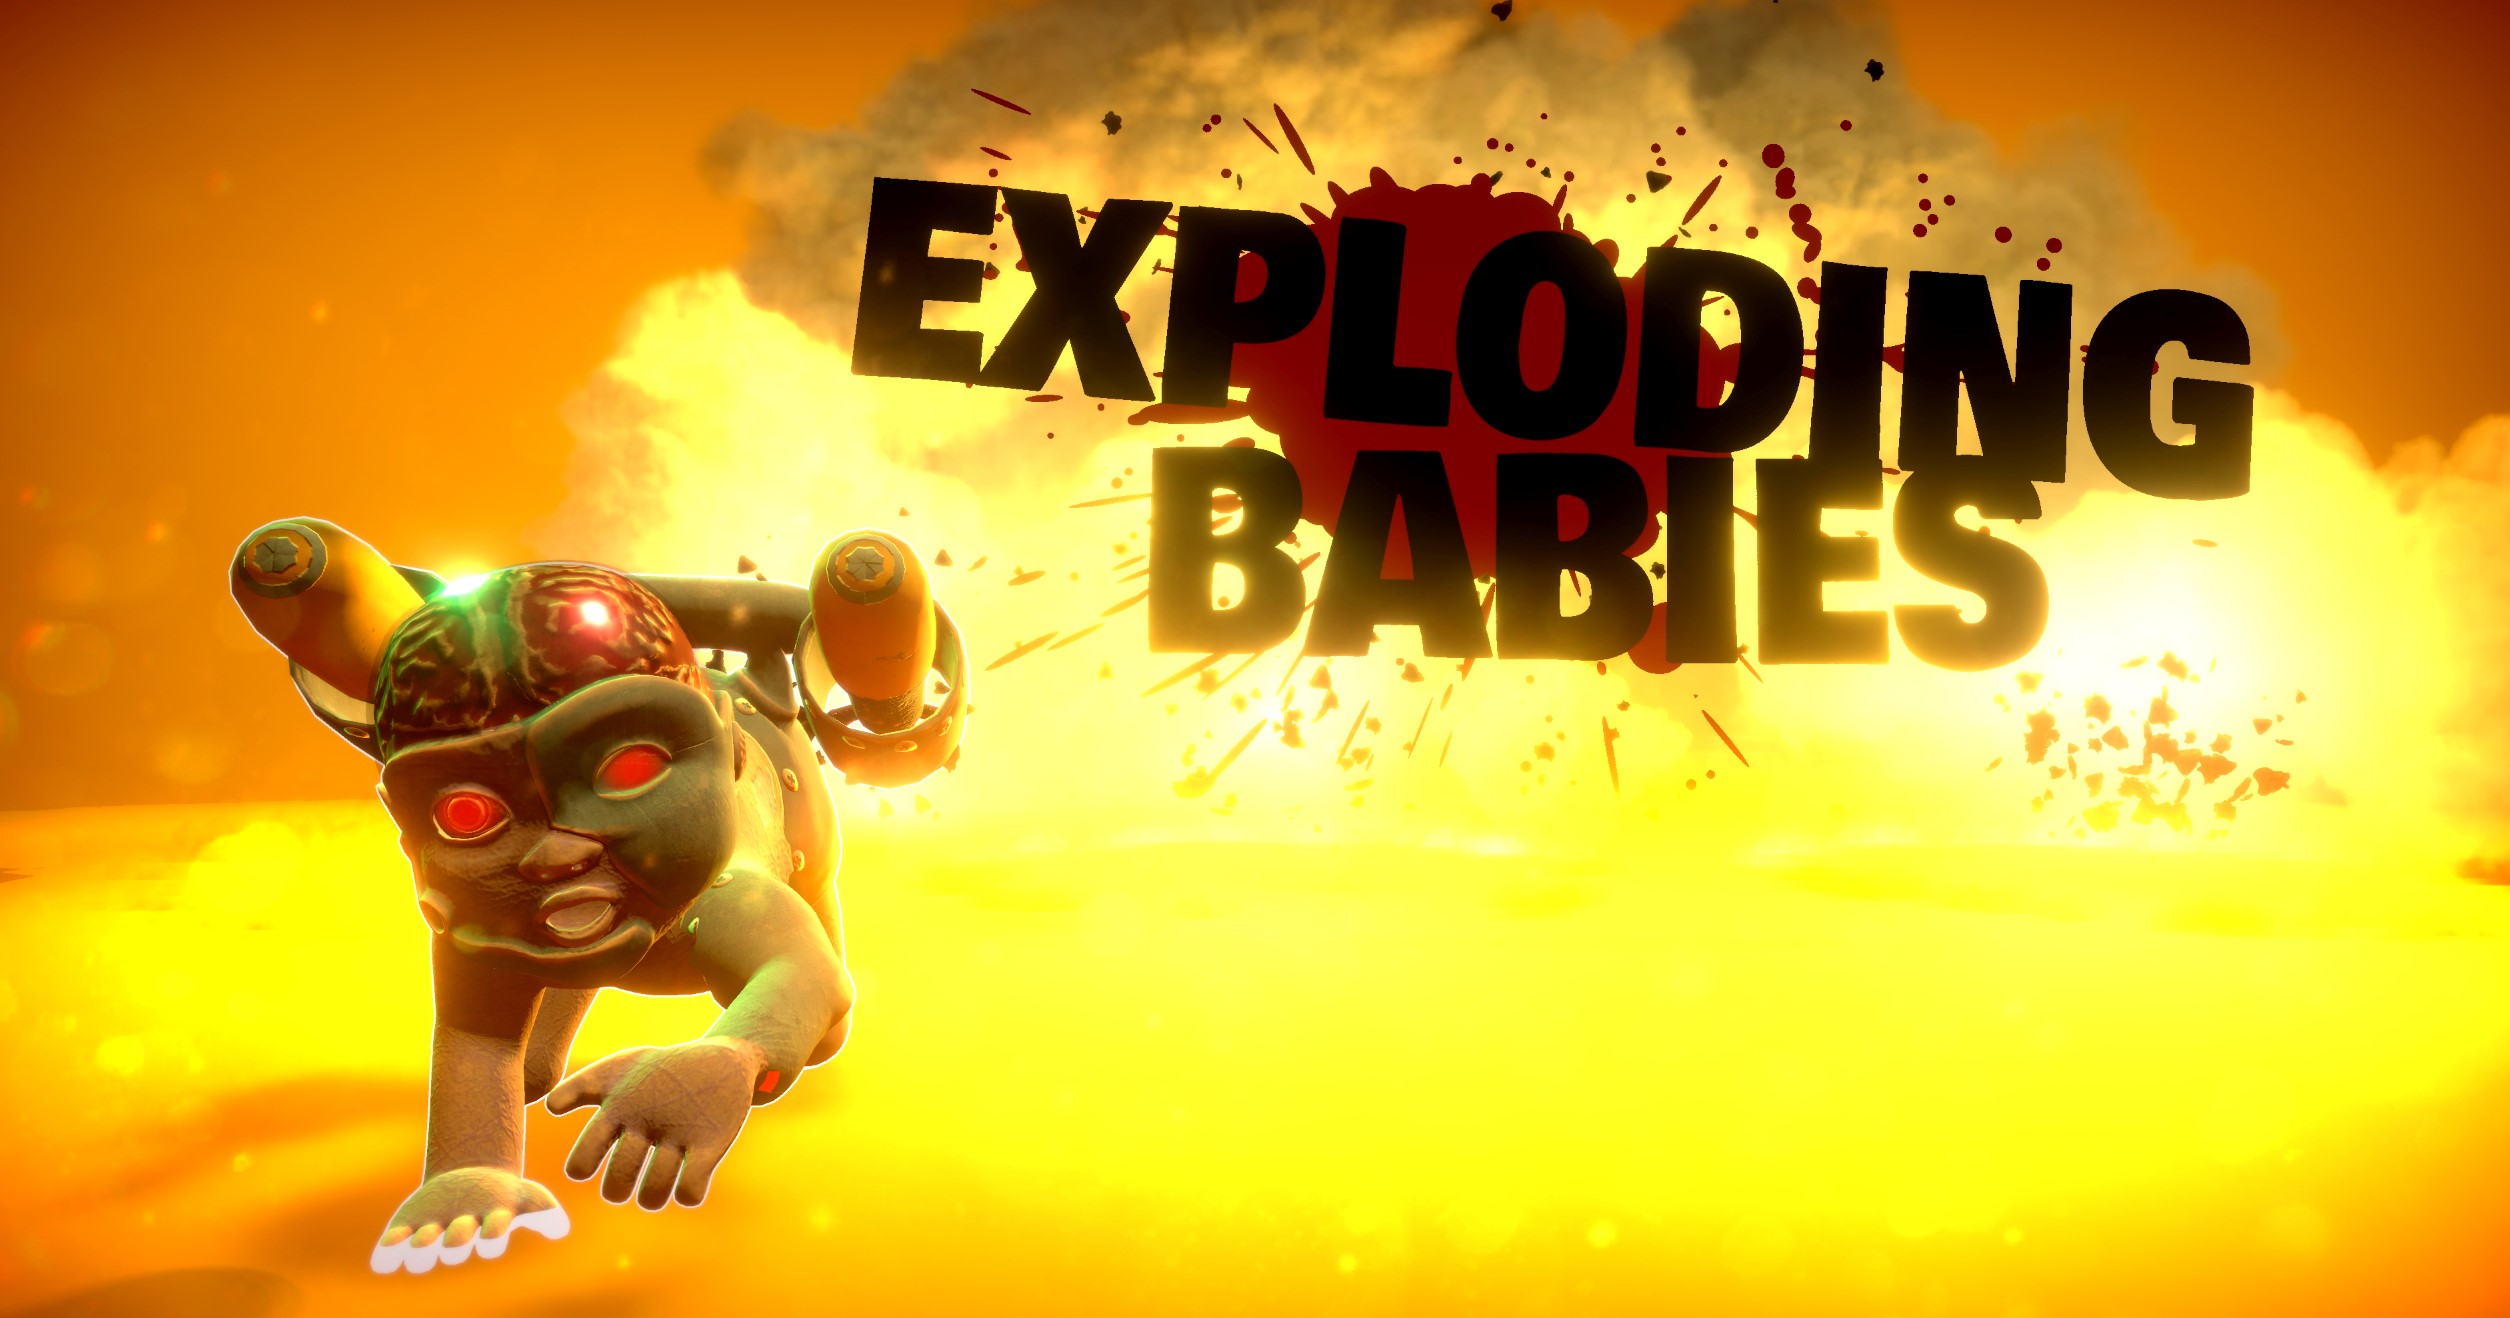 EXPLODING BABIES